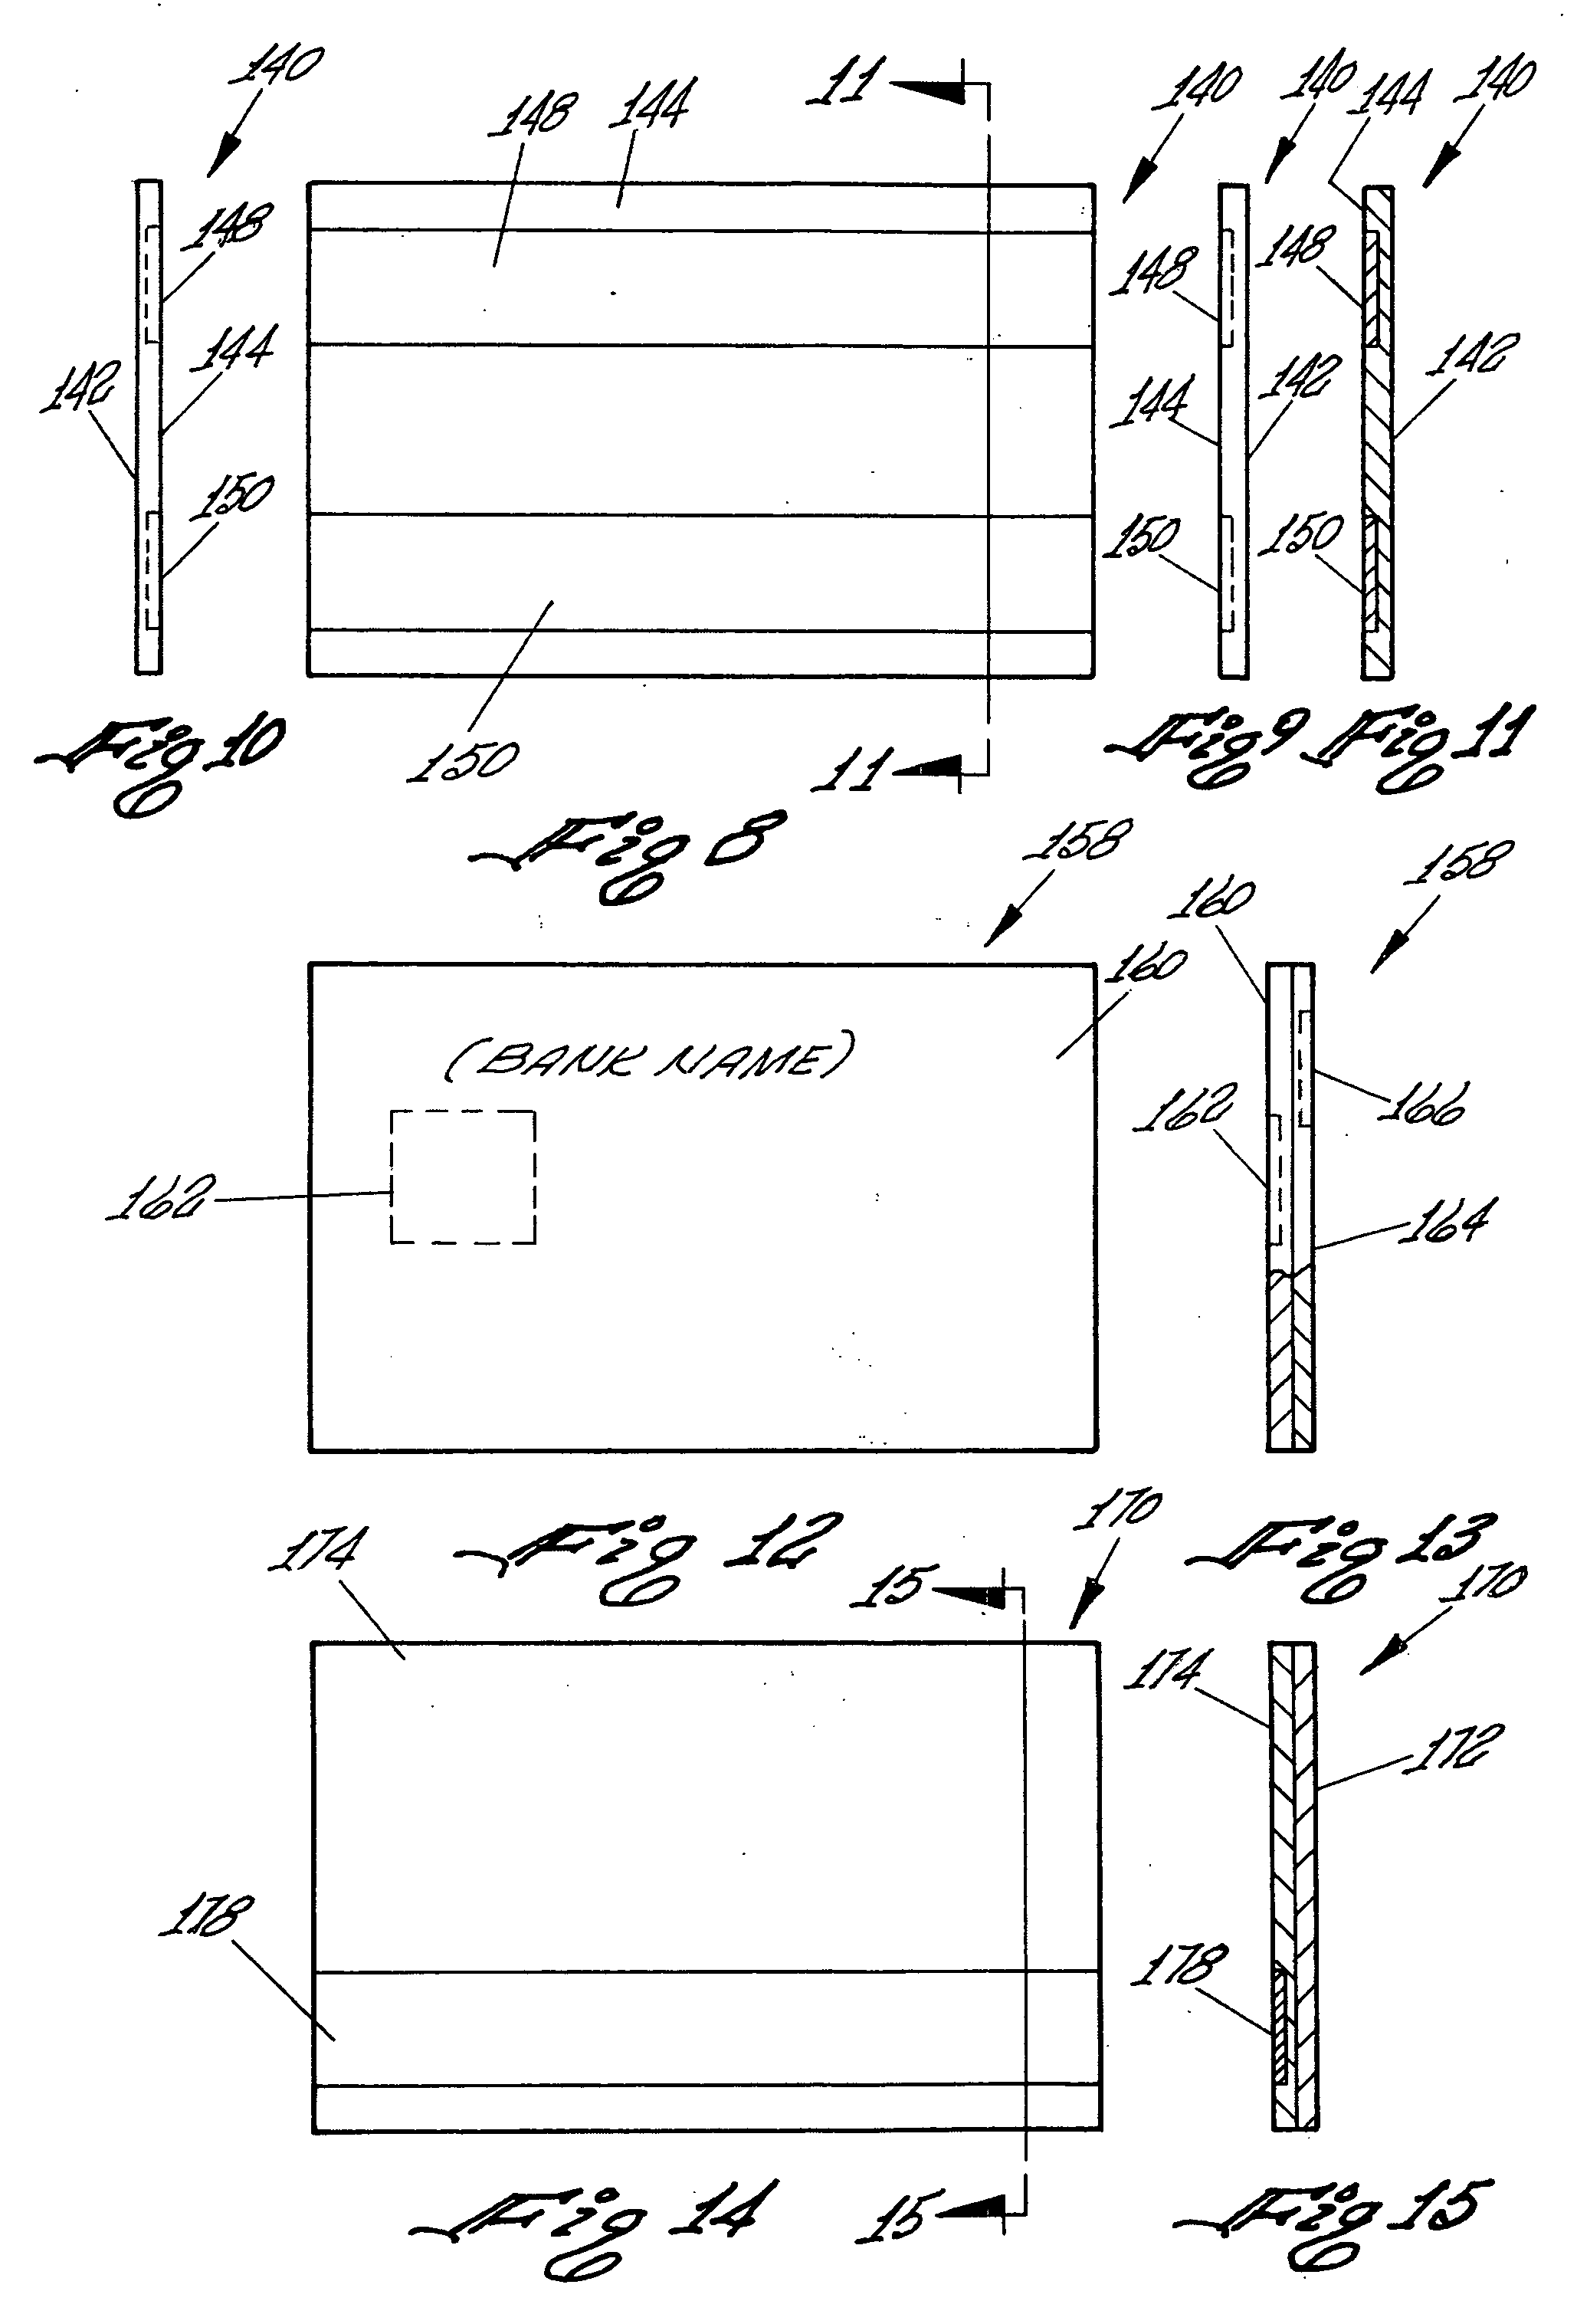 Data storage device, apparatus and method for using same